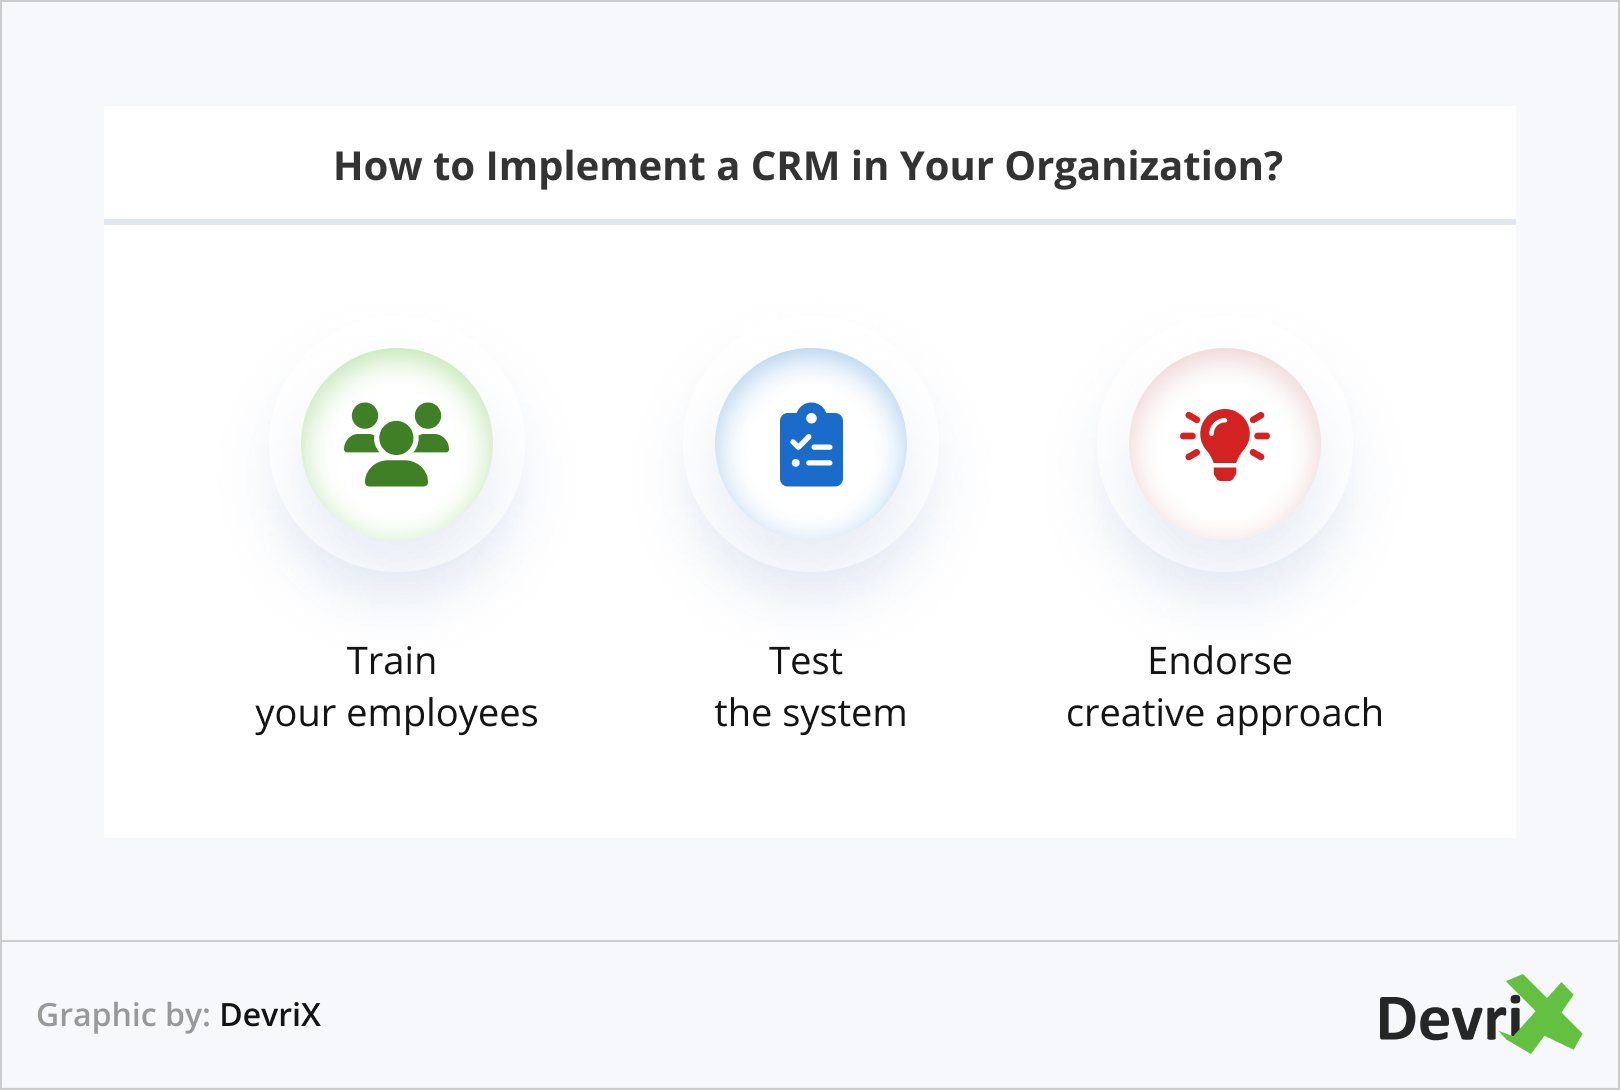 How to Implement a CRM in Your Organization